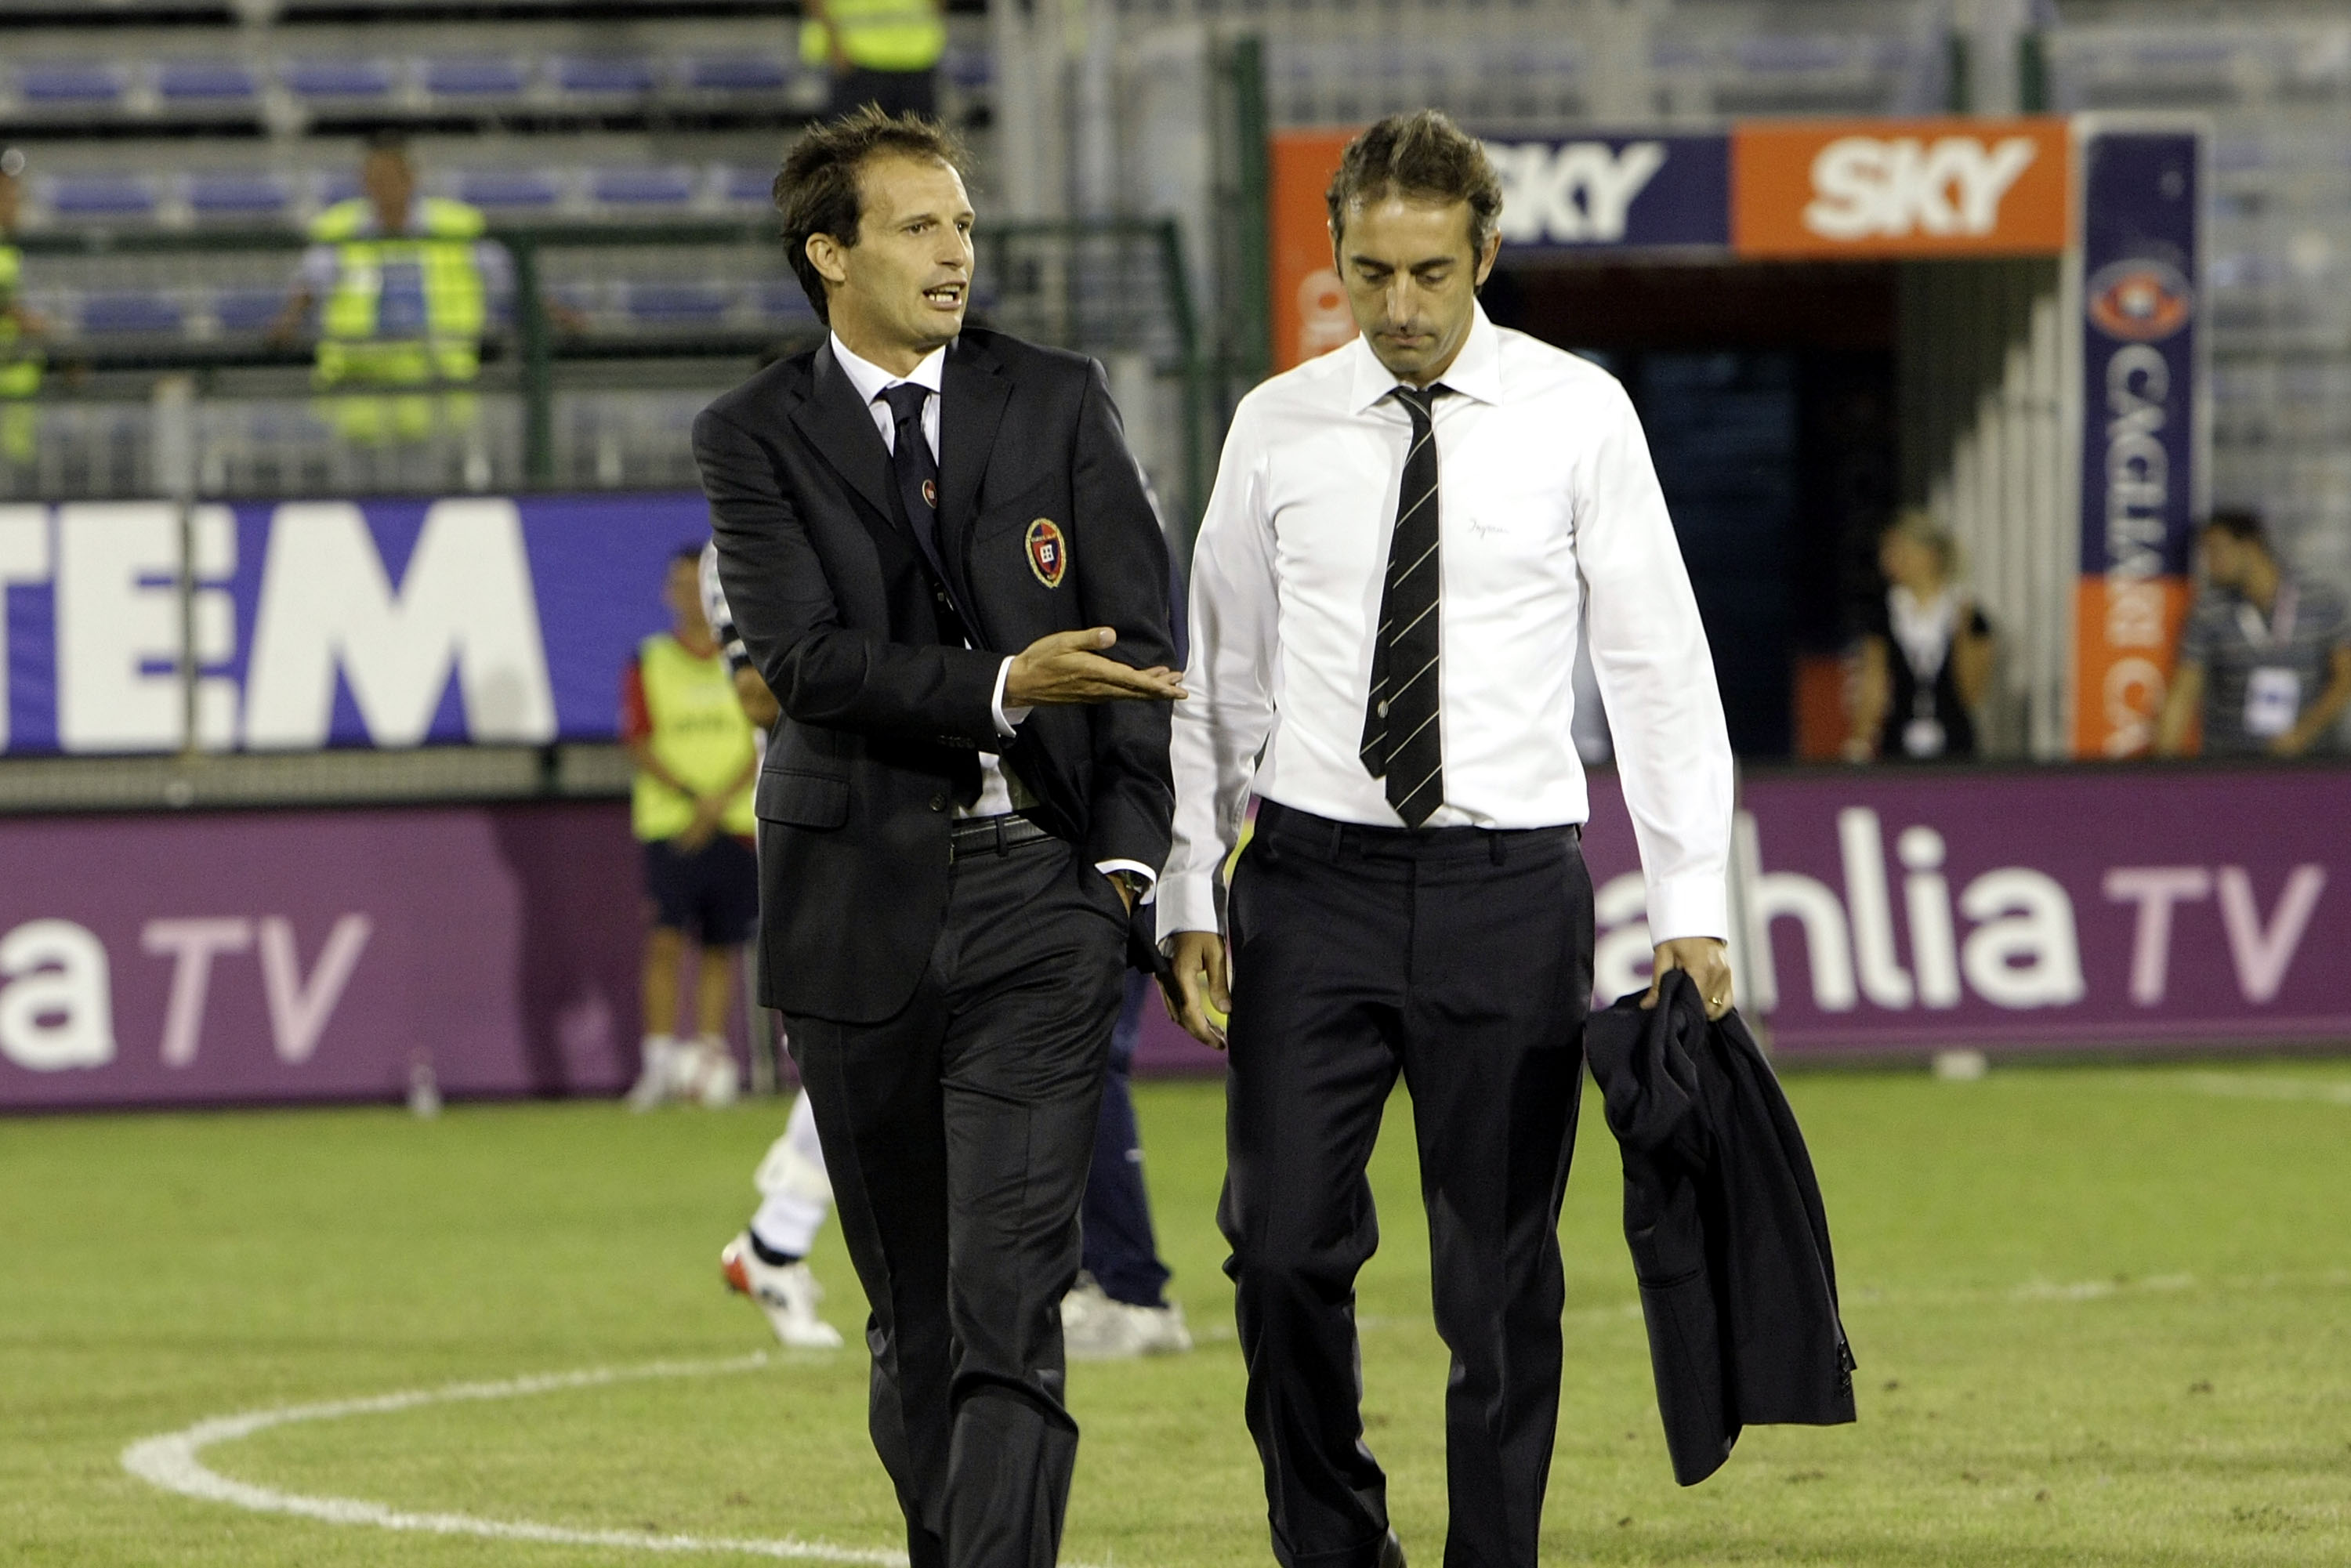 CAGLIARI, ITALY - AUGUST 30:  Marco Giampaolo and Massimiliano Allegri during the serie a match between cagliari and ac siena at Stadio Sant'Elia on August 30, 2009 in Cagliari, Italy.  (Photo by Enrico Locci/Getty Images)